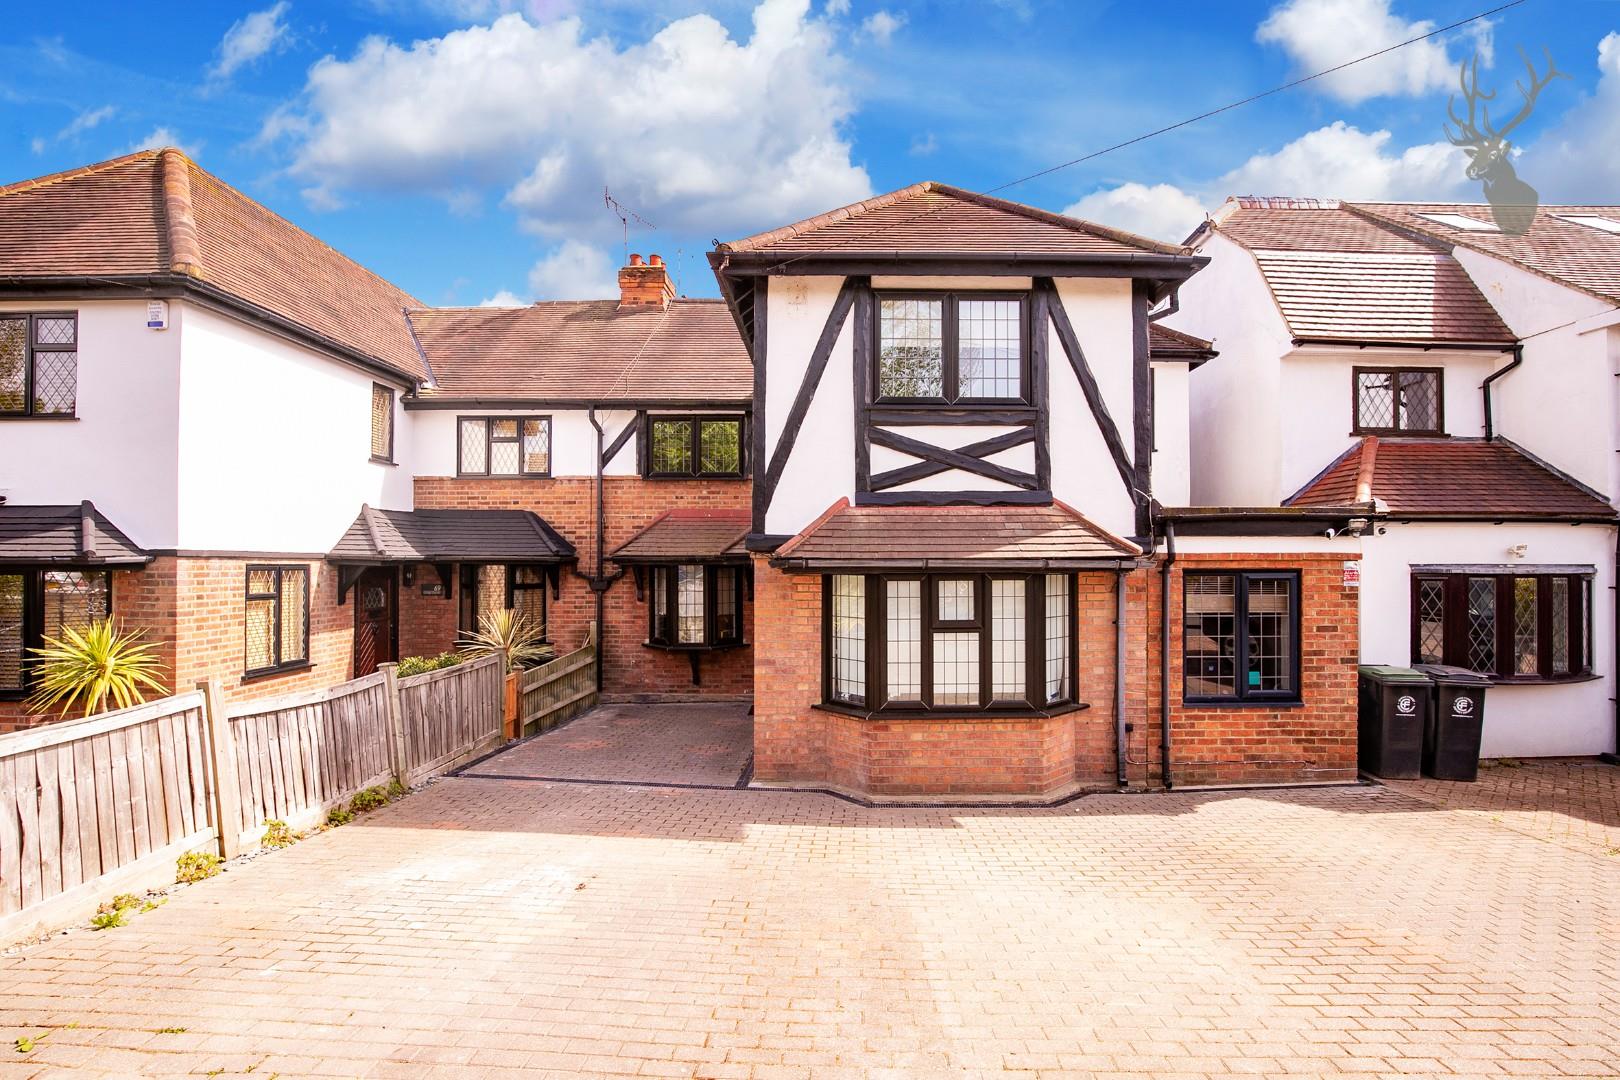 Similar Property: House - Semi-Detached in Chigwell